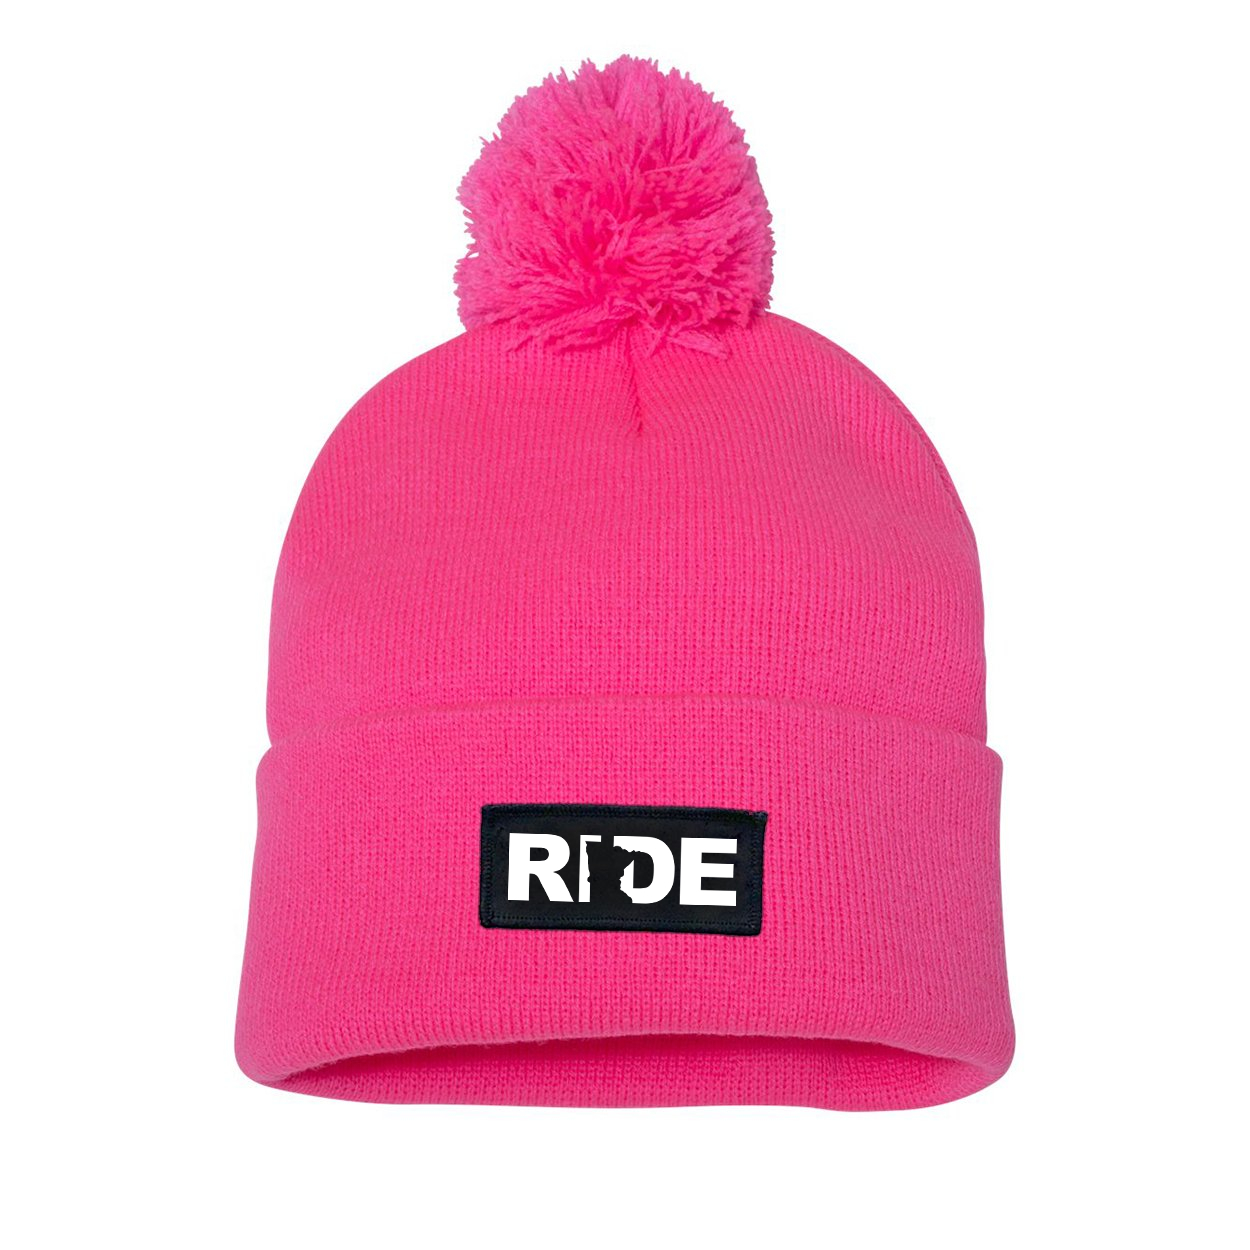 Ride Minnesota Night Out Woven Patch Roll Up Pom Knit Beanie Pink (White Logo)